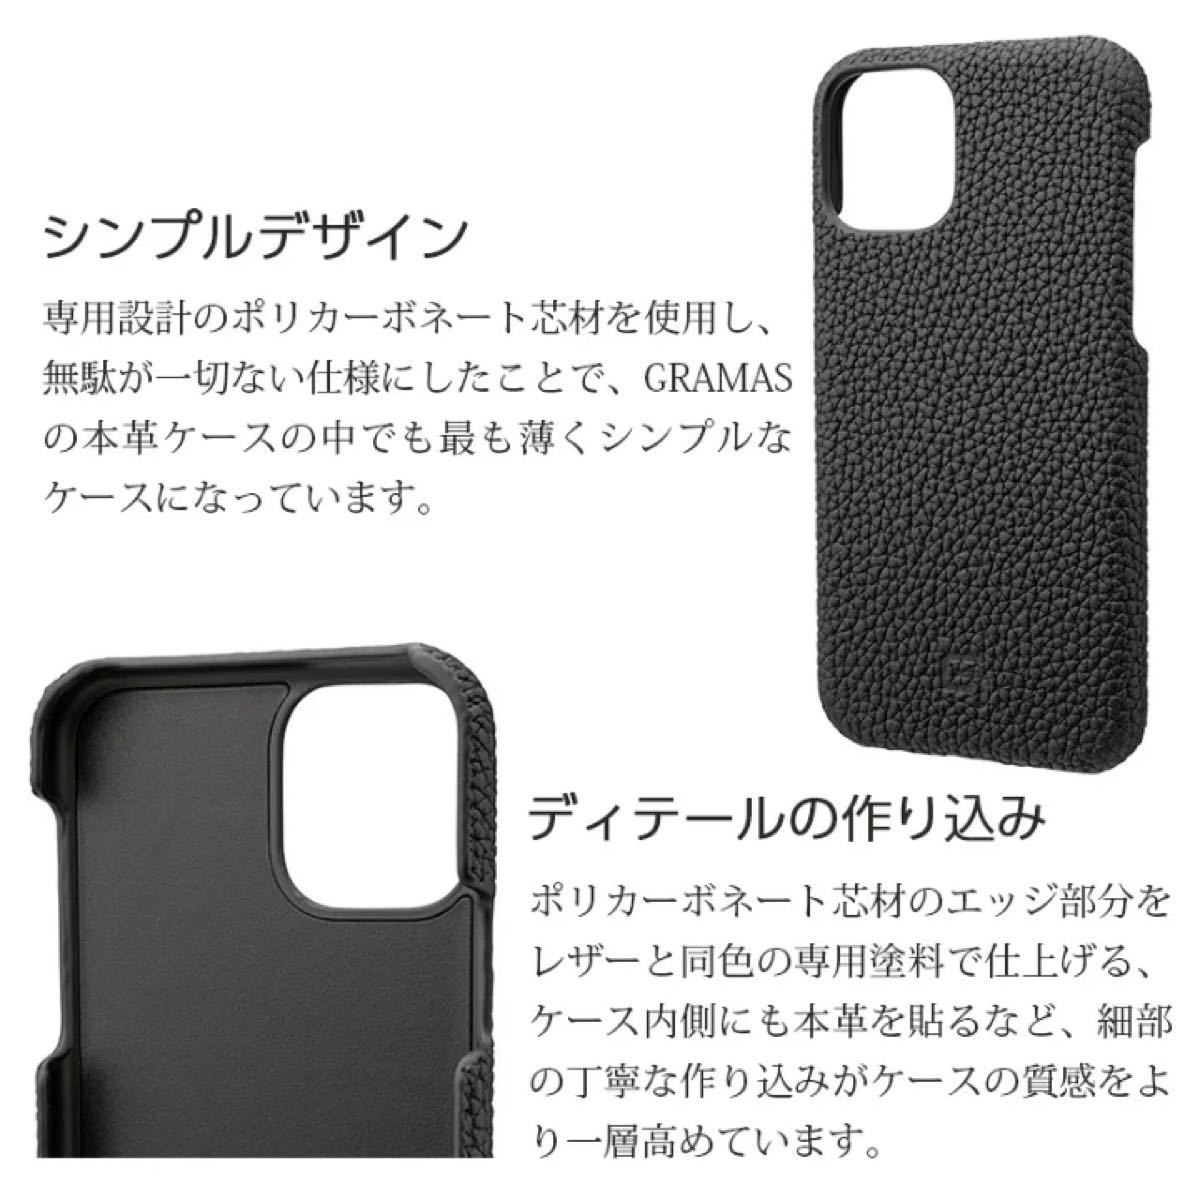 GRAMAS Shrunken-calf Leather Shell Case for iPhone 11 Pro Max